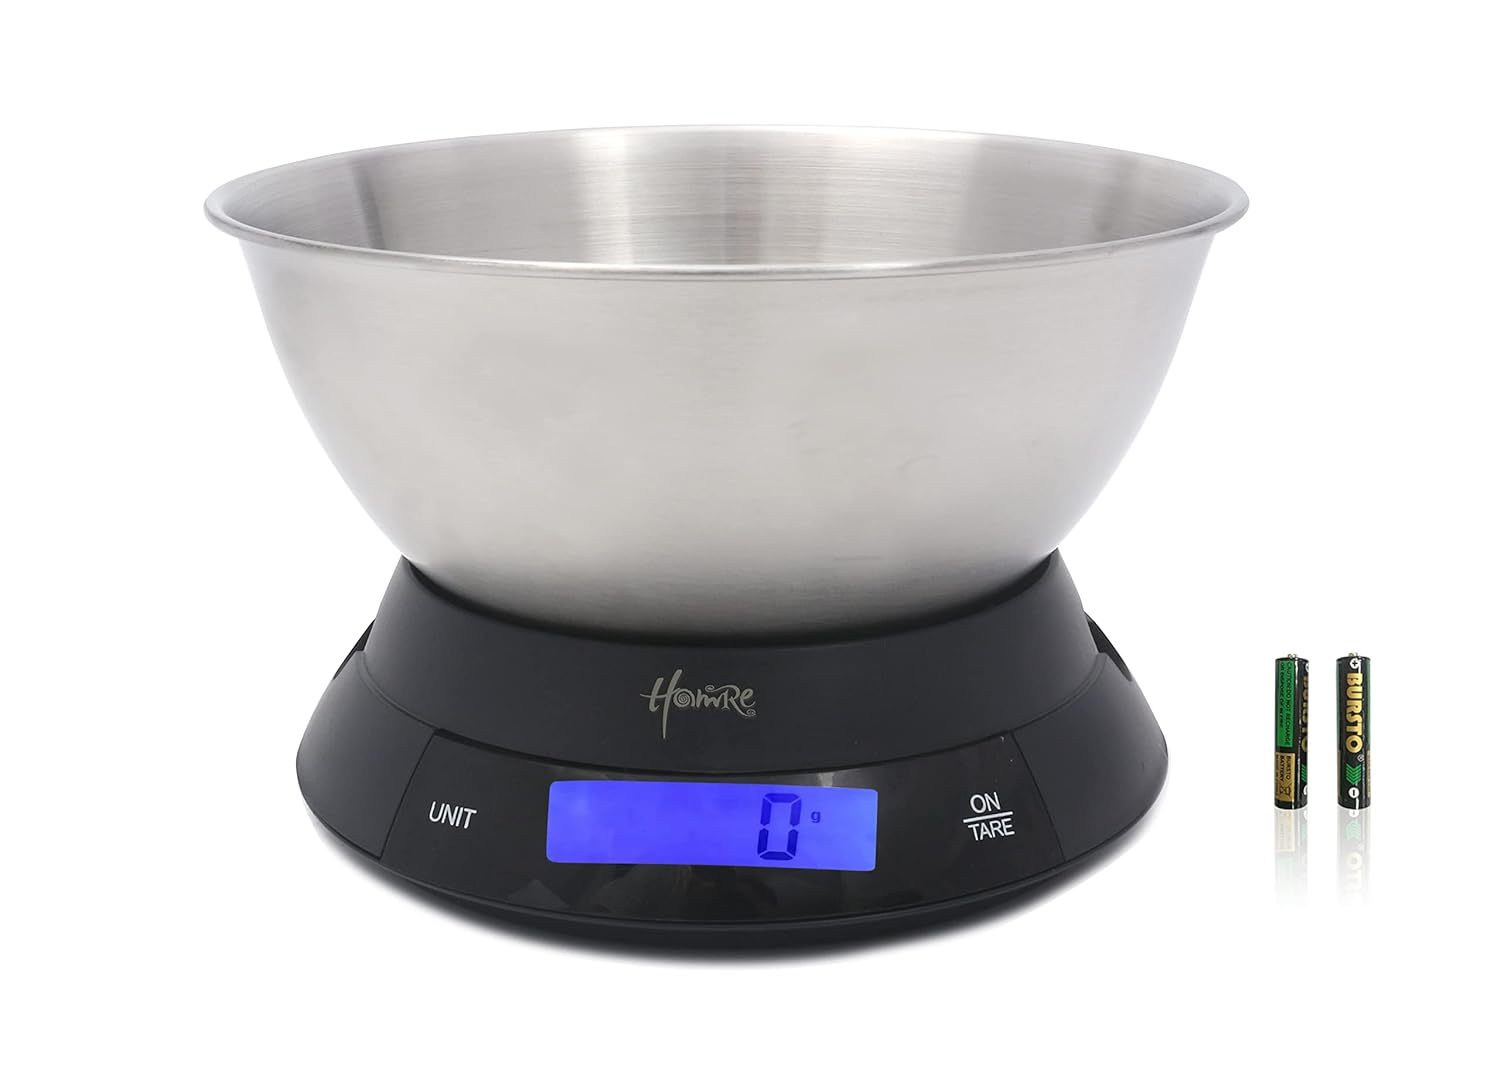 Digital Kitchen Food Scale 22lb/1g Multifunction w/ Tare Function Weight  Balance